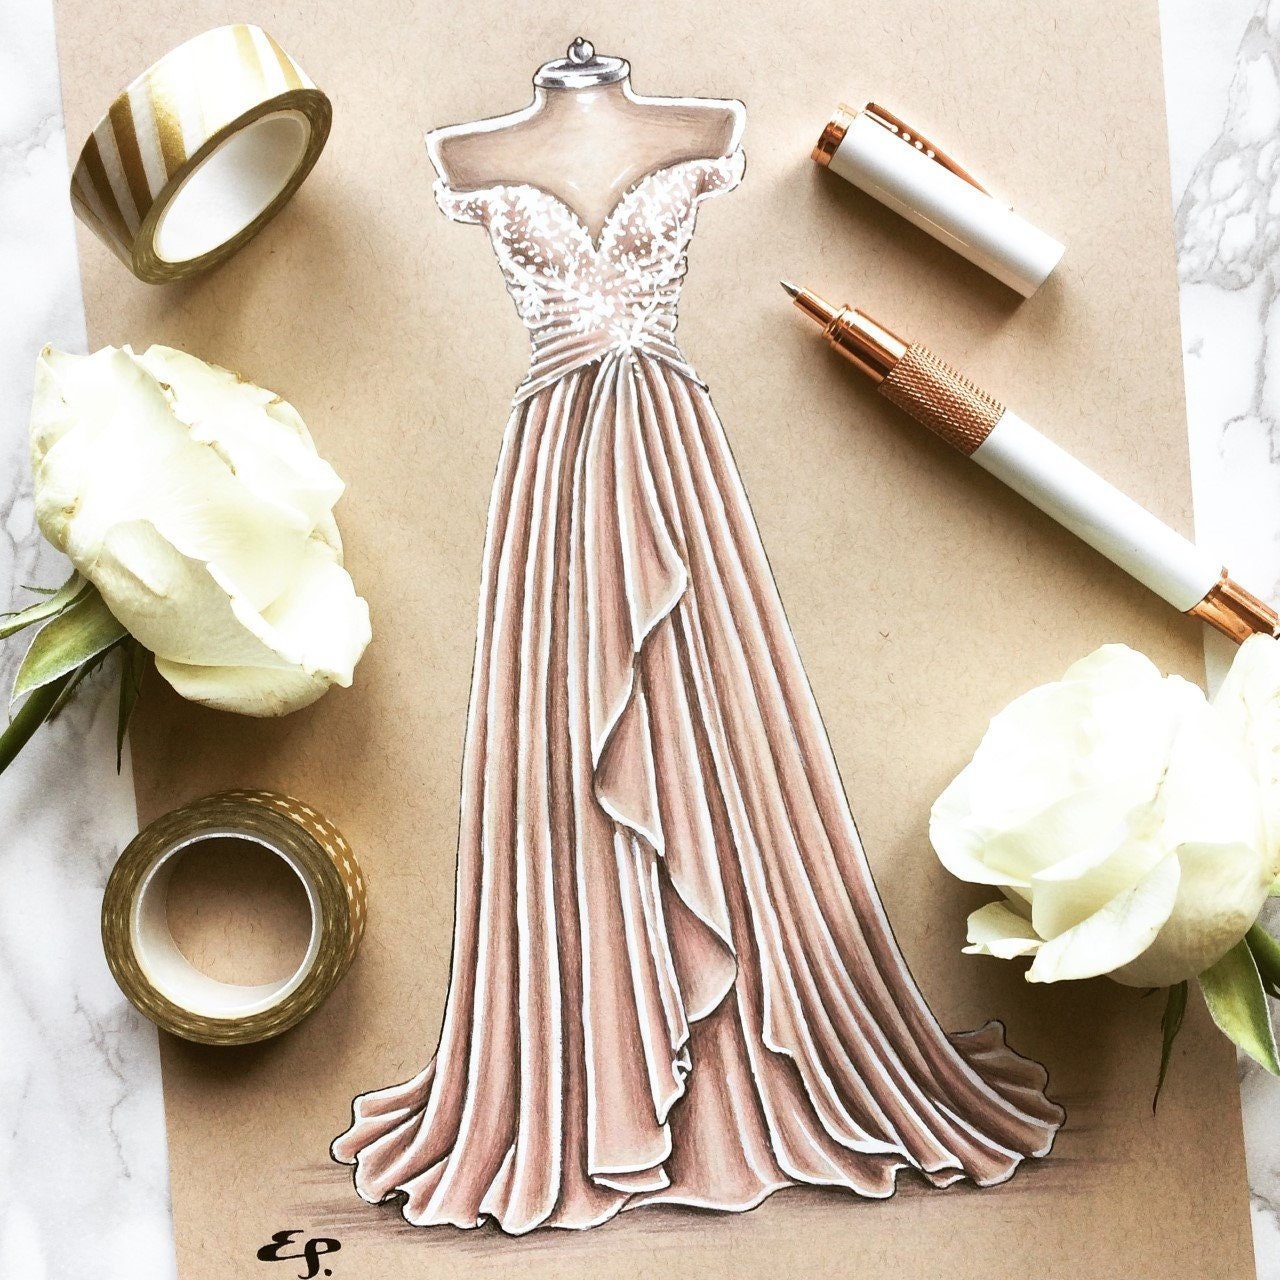 Beautiful drawing gown design | Facebook